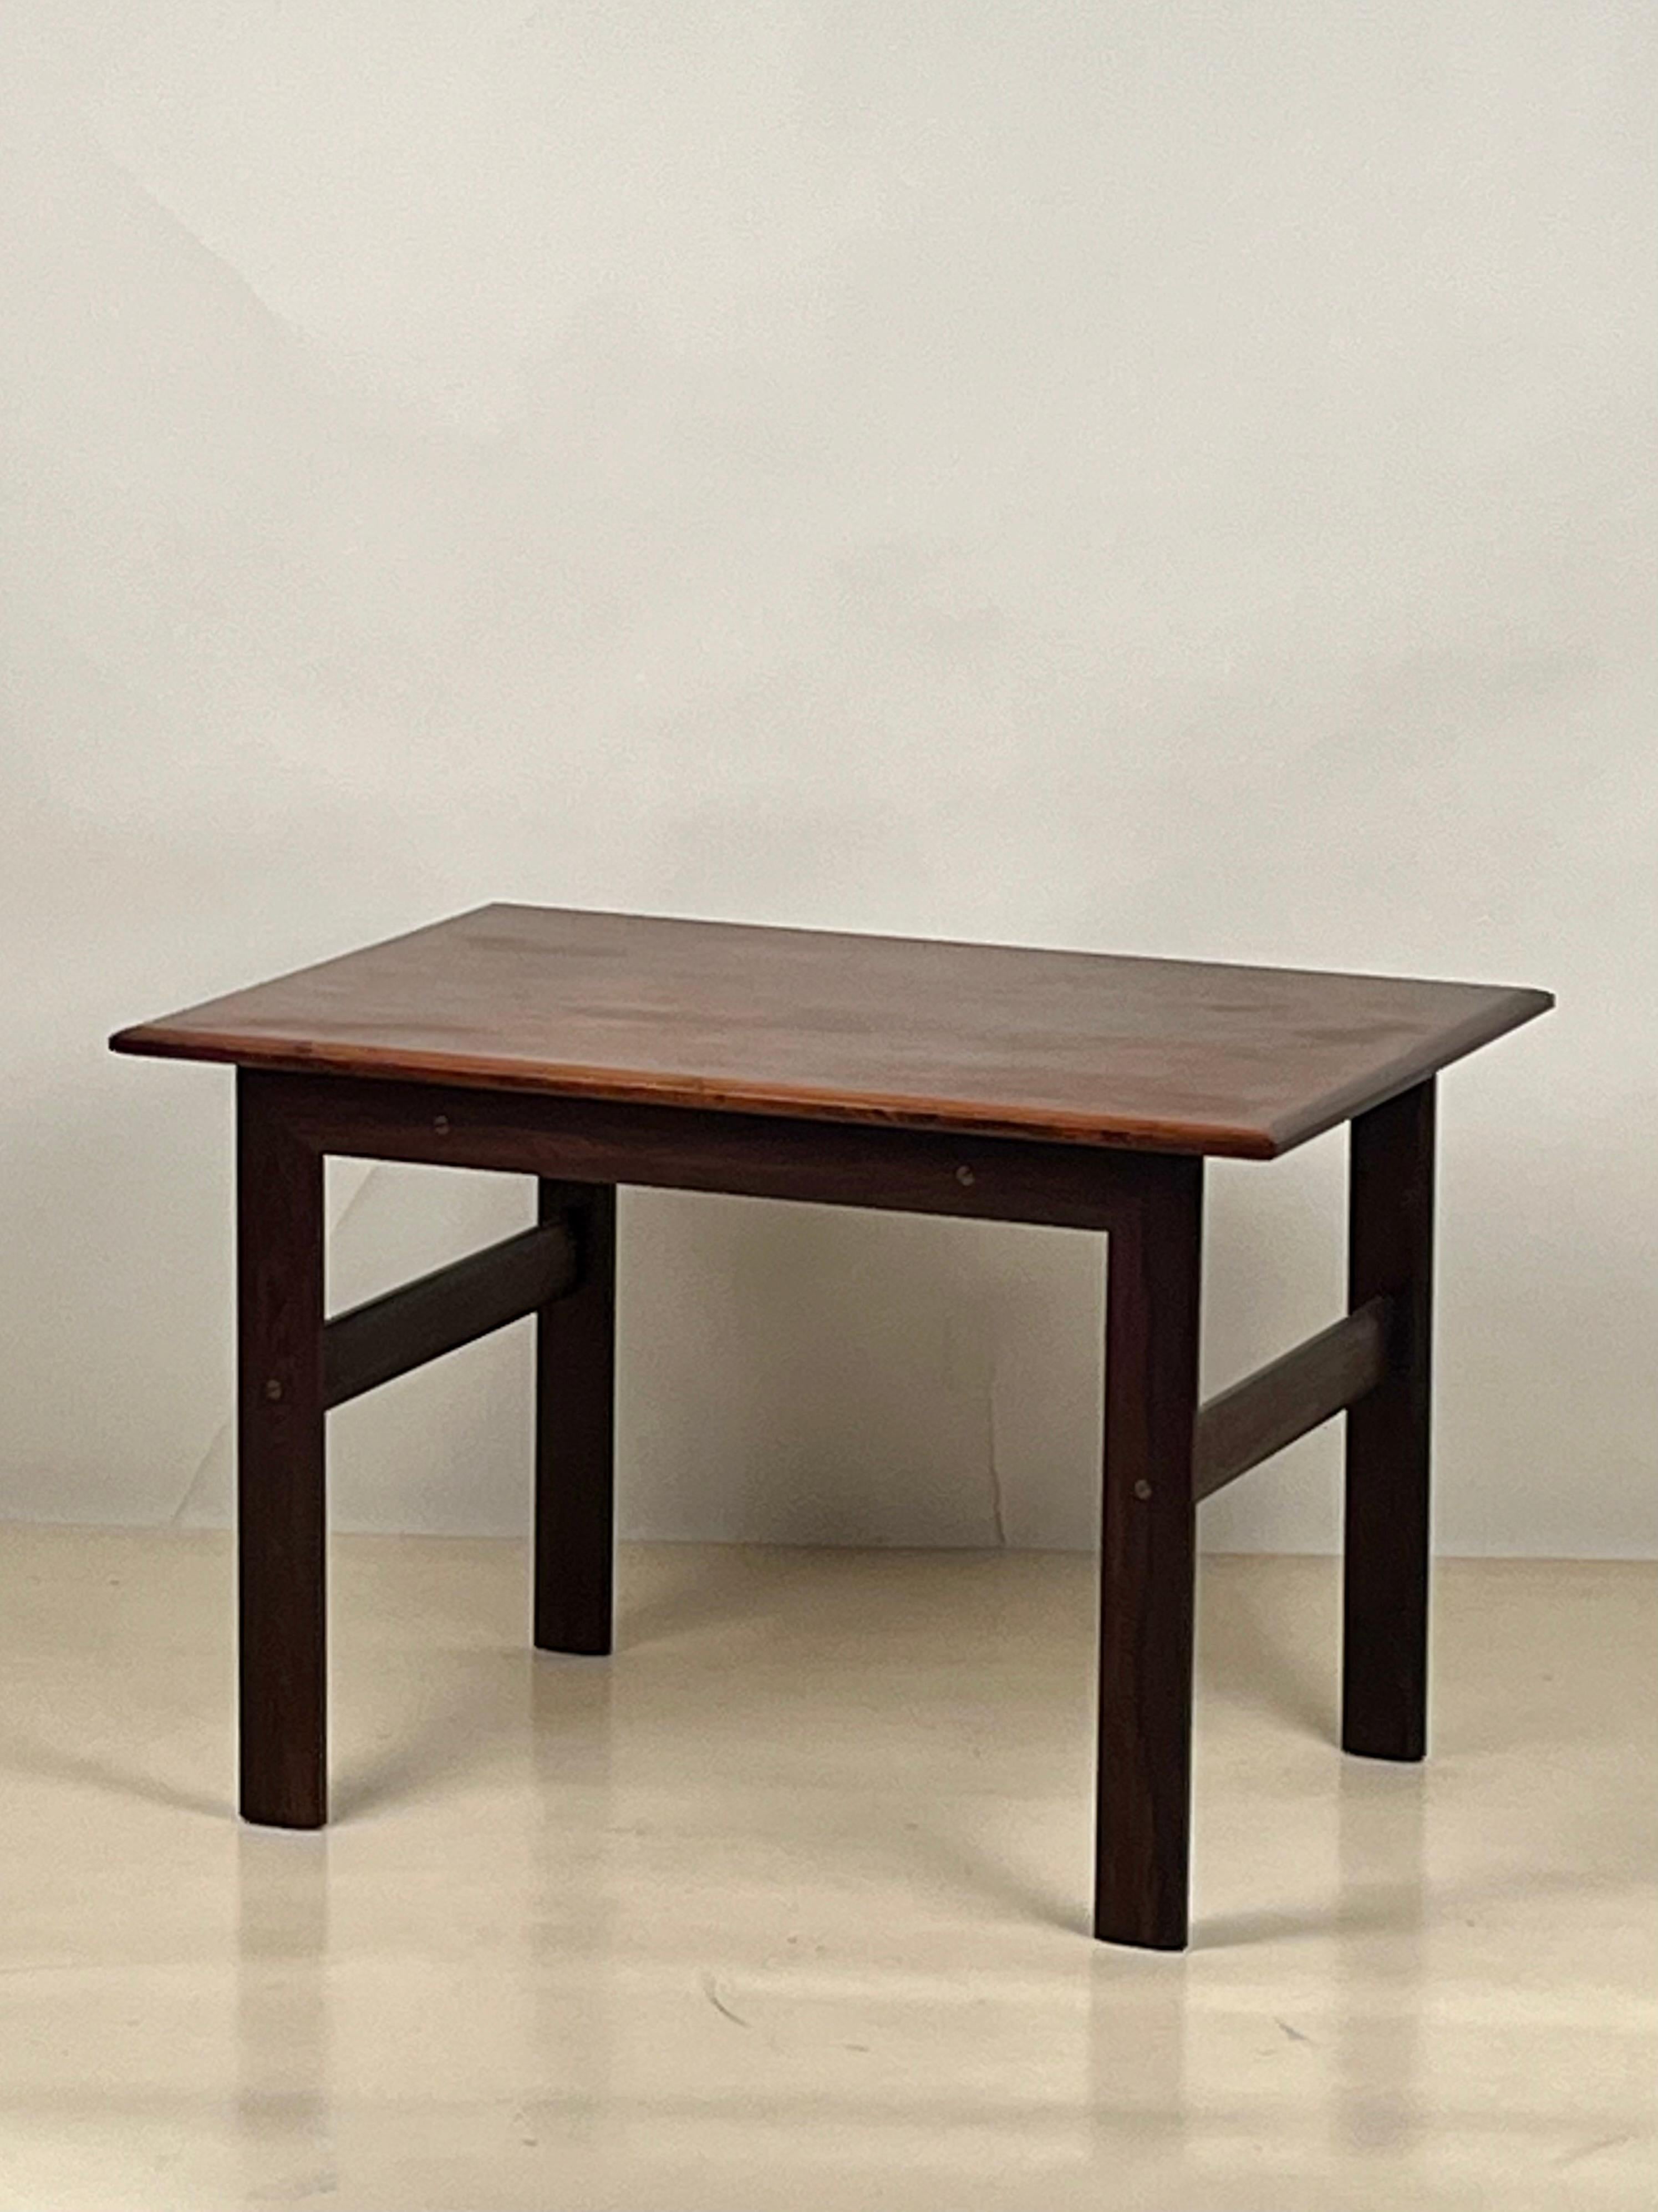 Solid rosewood frame with beautifully patterned rosewood veneer top.